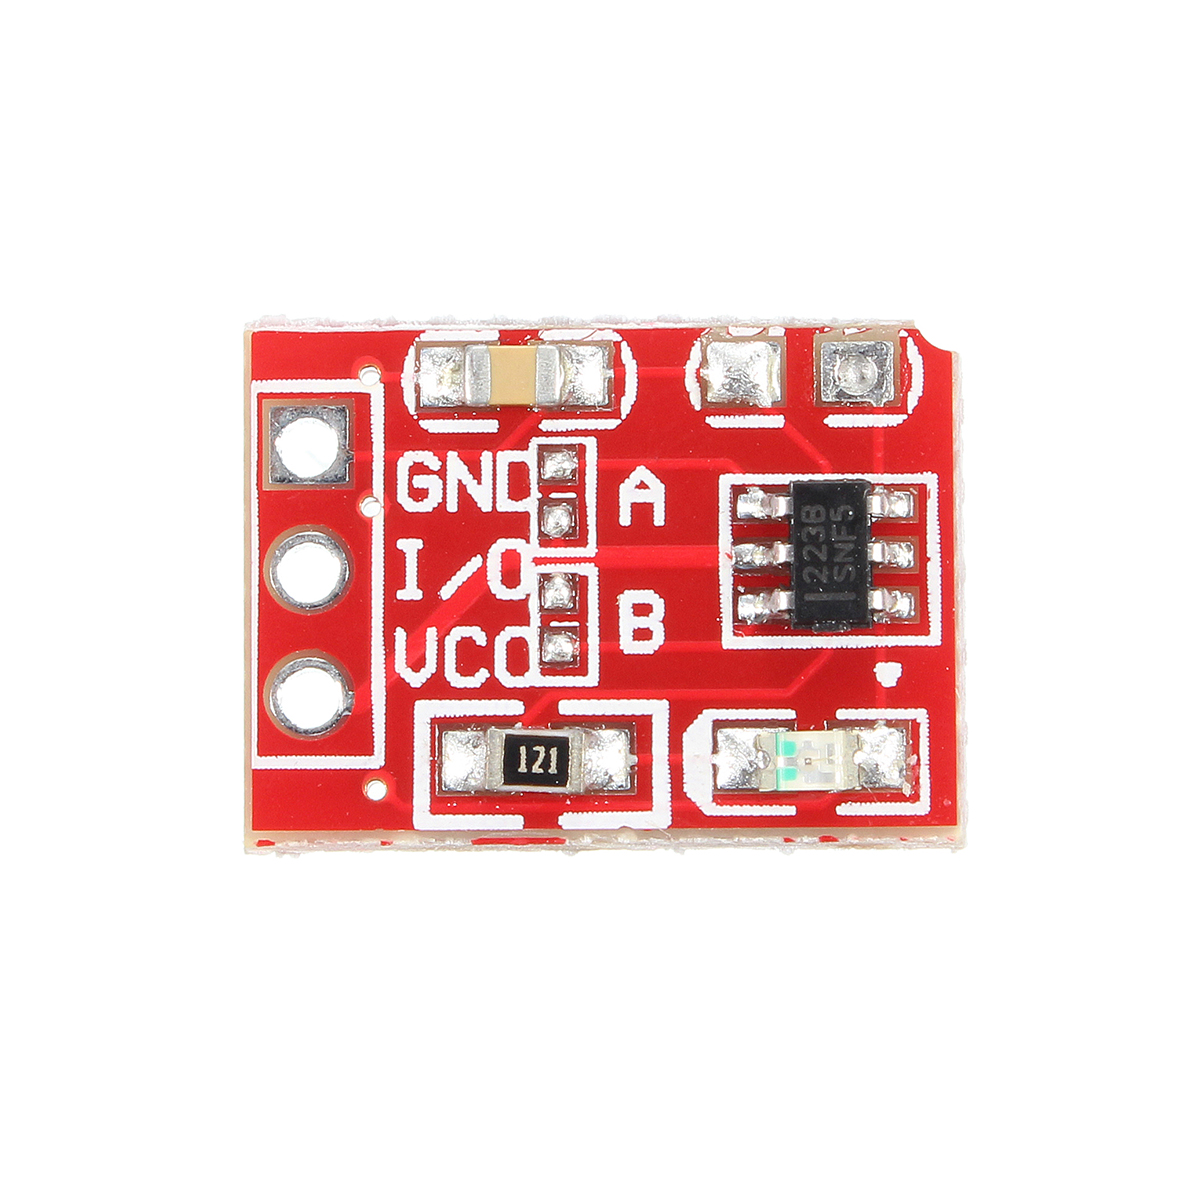 5Pcs-25-55V-TTP223-Capacitive-Touch-Switch-Button-Self-Lock-Module-1132673